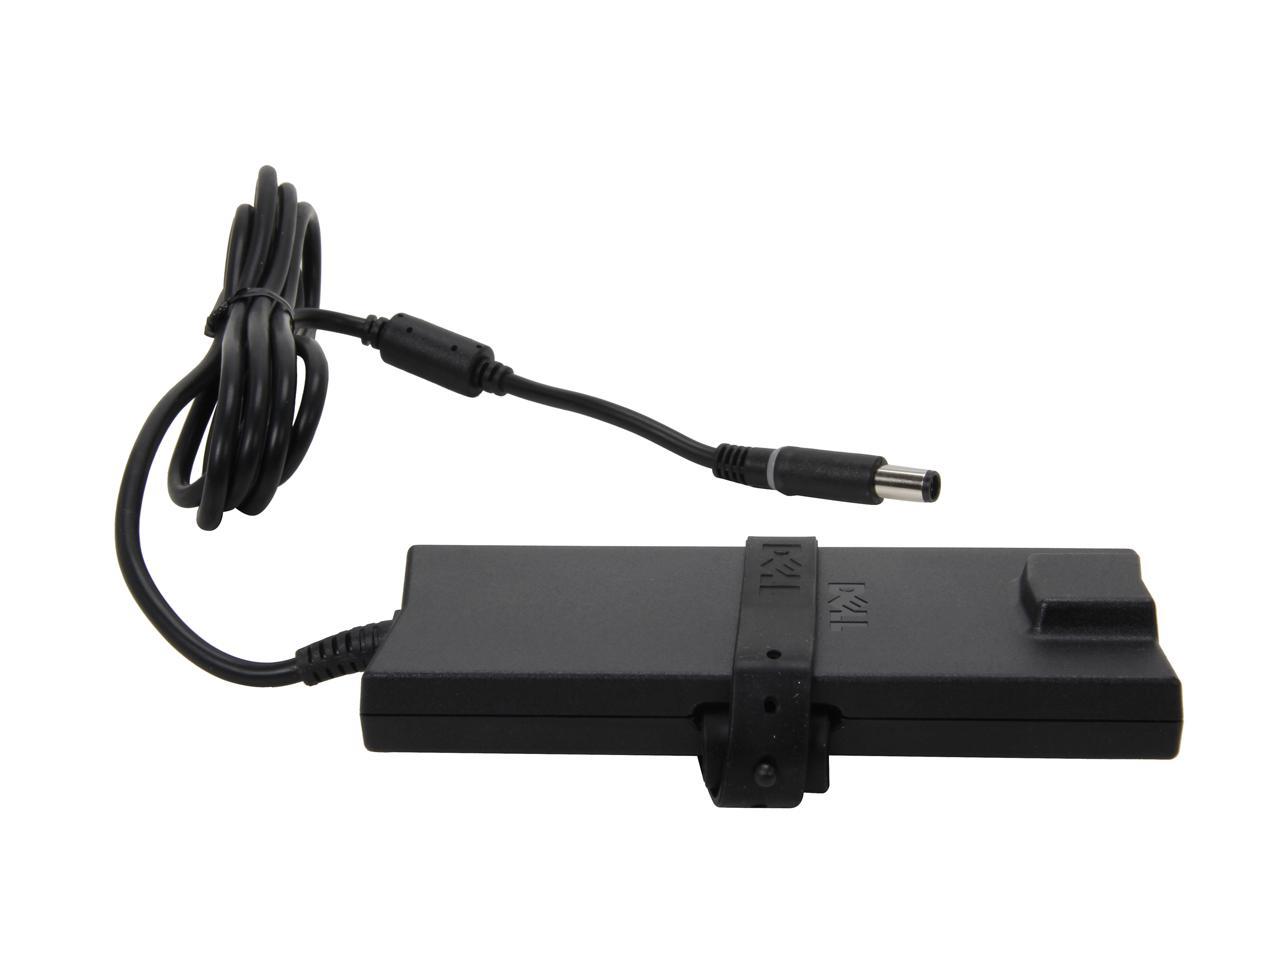 90w AC Adapter (E5 next gen) (including converting dongle 7.4->4.5mm) - image 2 of 5